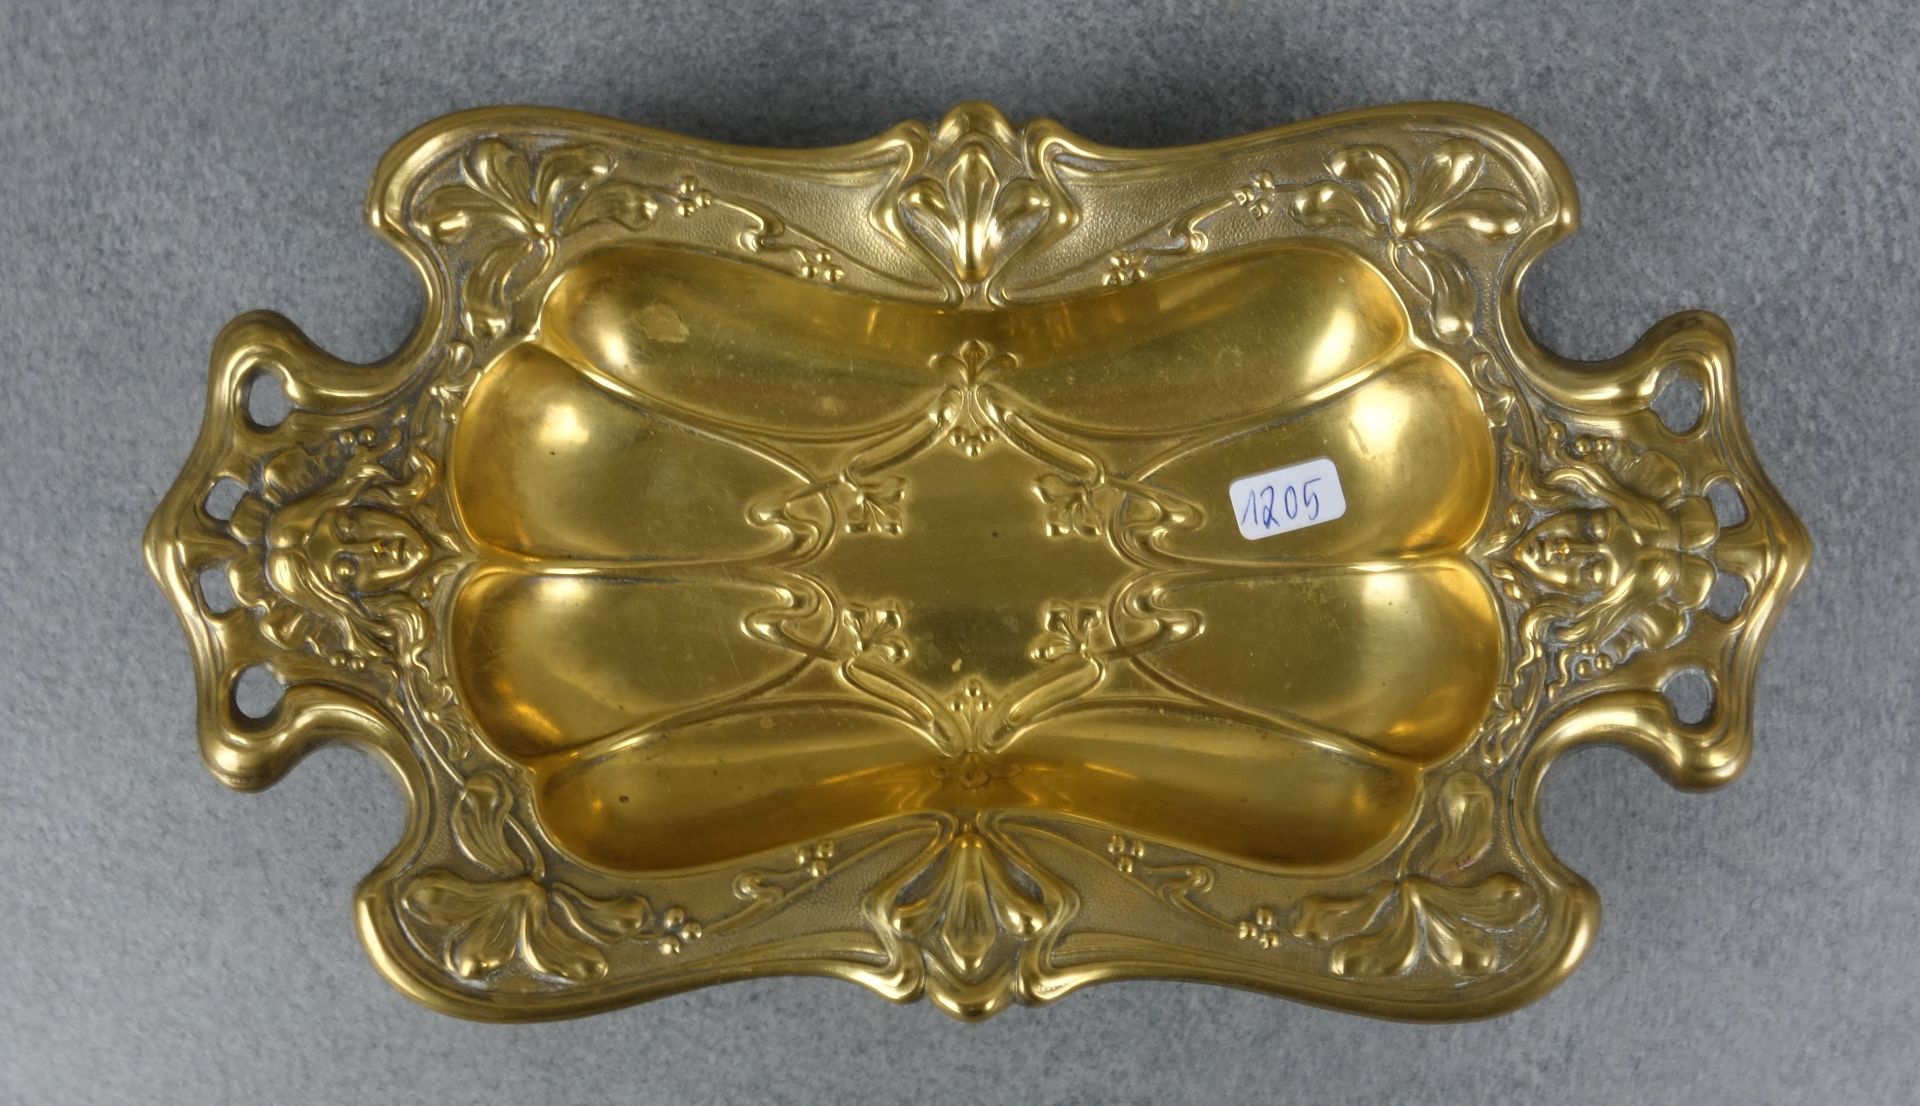 BUSINESS CARD TRAY IN THE FORMAL LANGUAGE OF ART NOUVEAU / BOWL